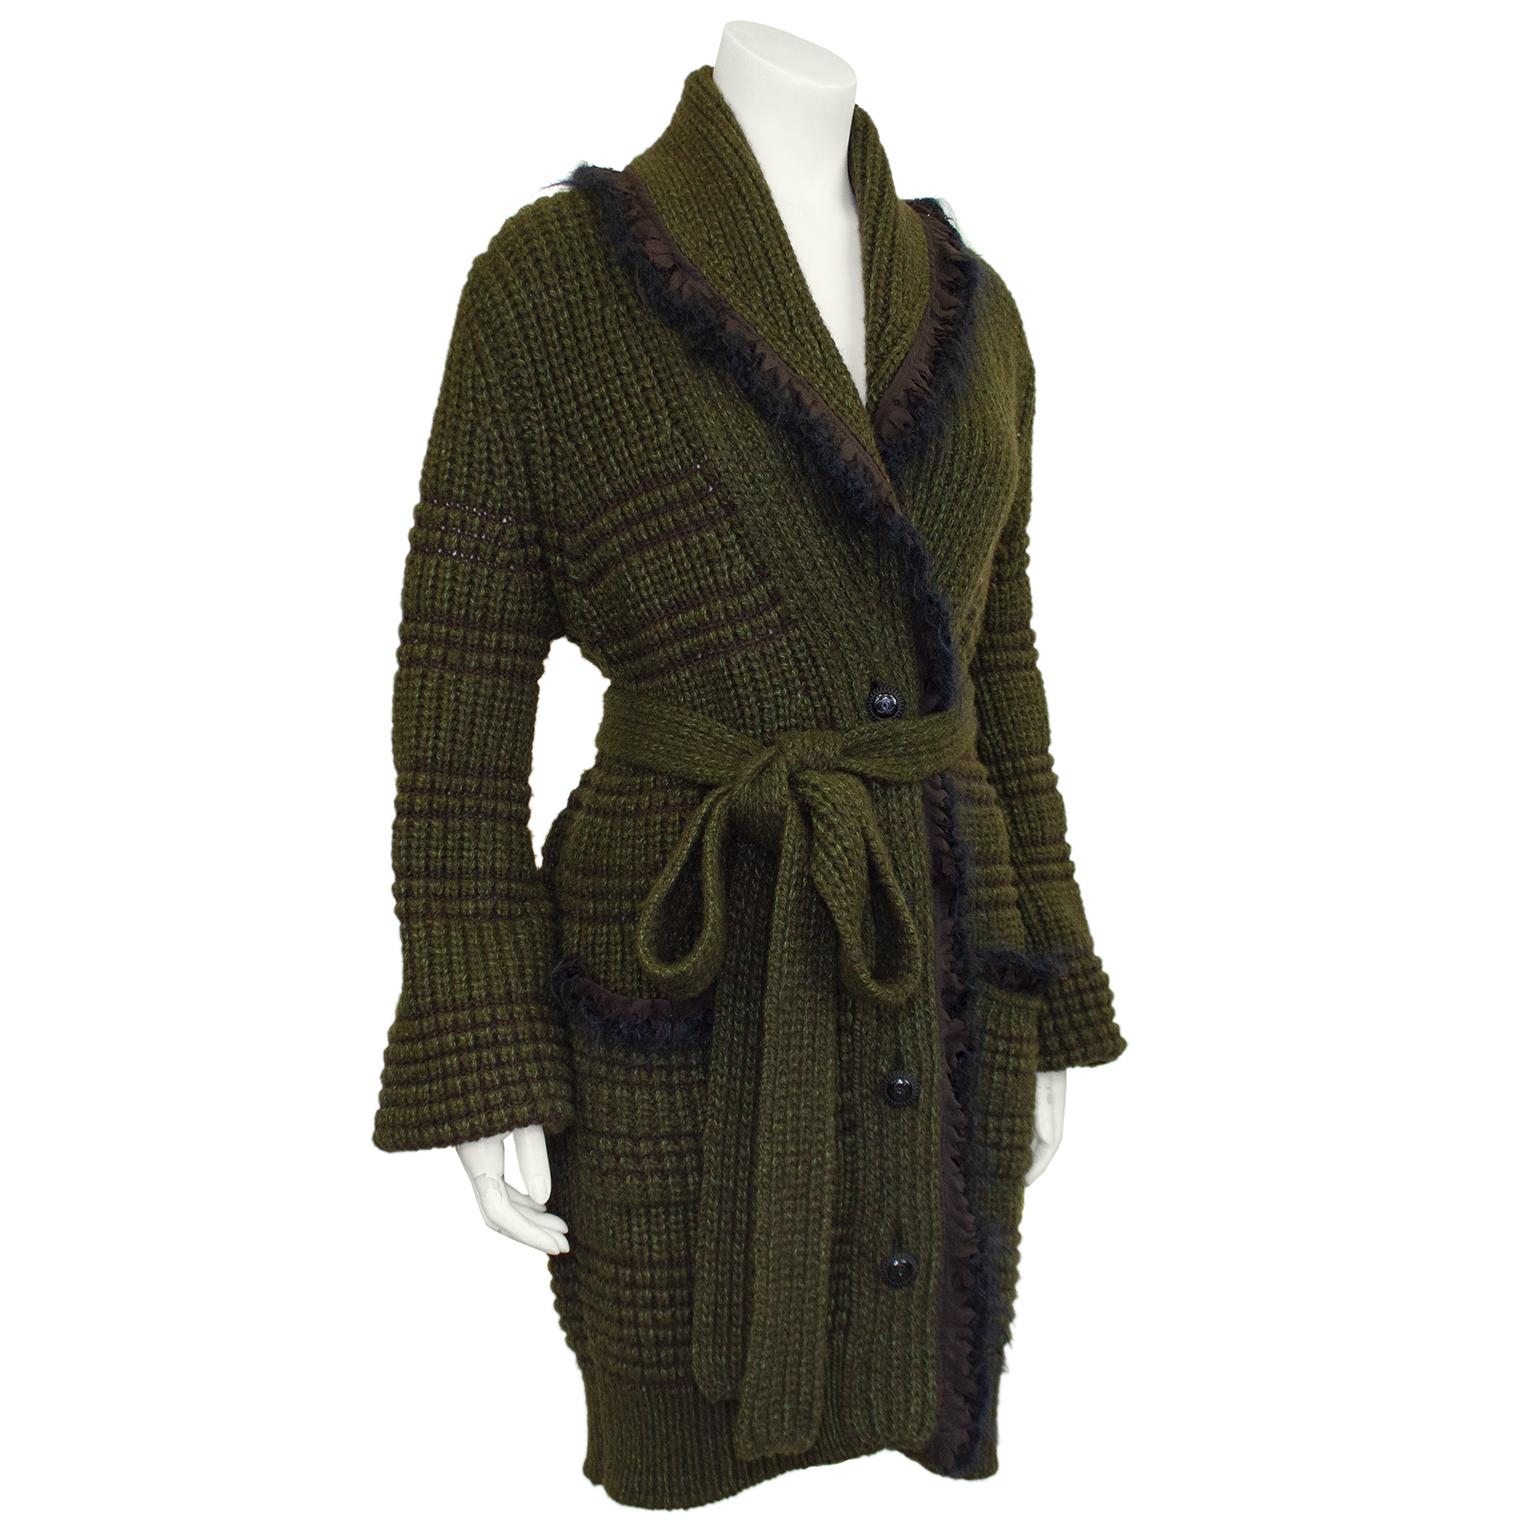 Chanel 2008A autumn collection sweater coat with fringed edge and  shawl collar. Deep olive green and brown knit with CC logo antique silver finished buttons. Self tie belt and two large patch pockets below the hips. Made from 88% yak wool and 12%